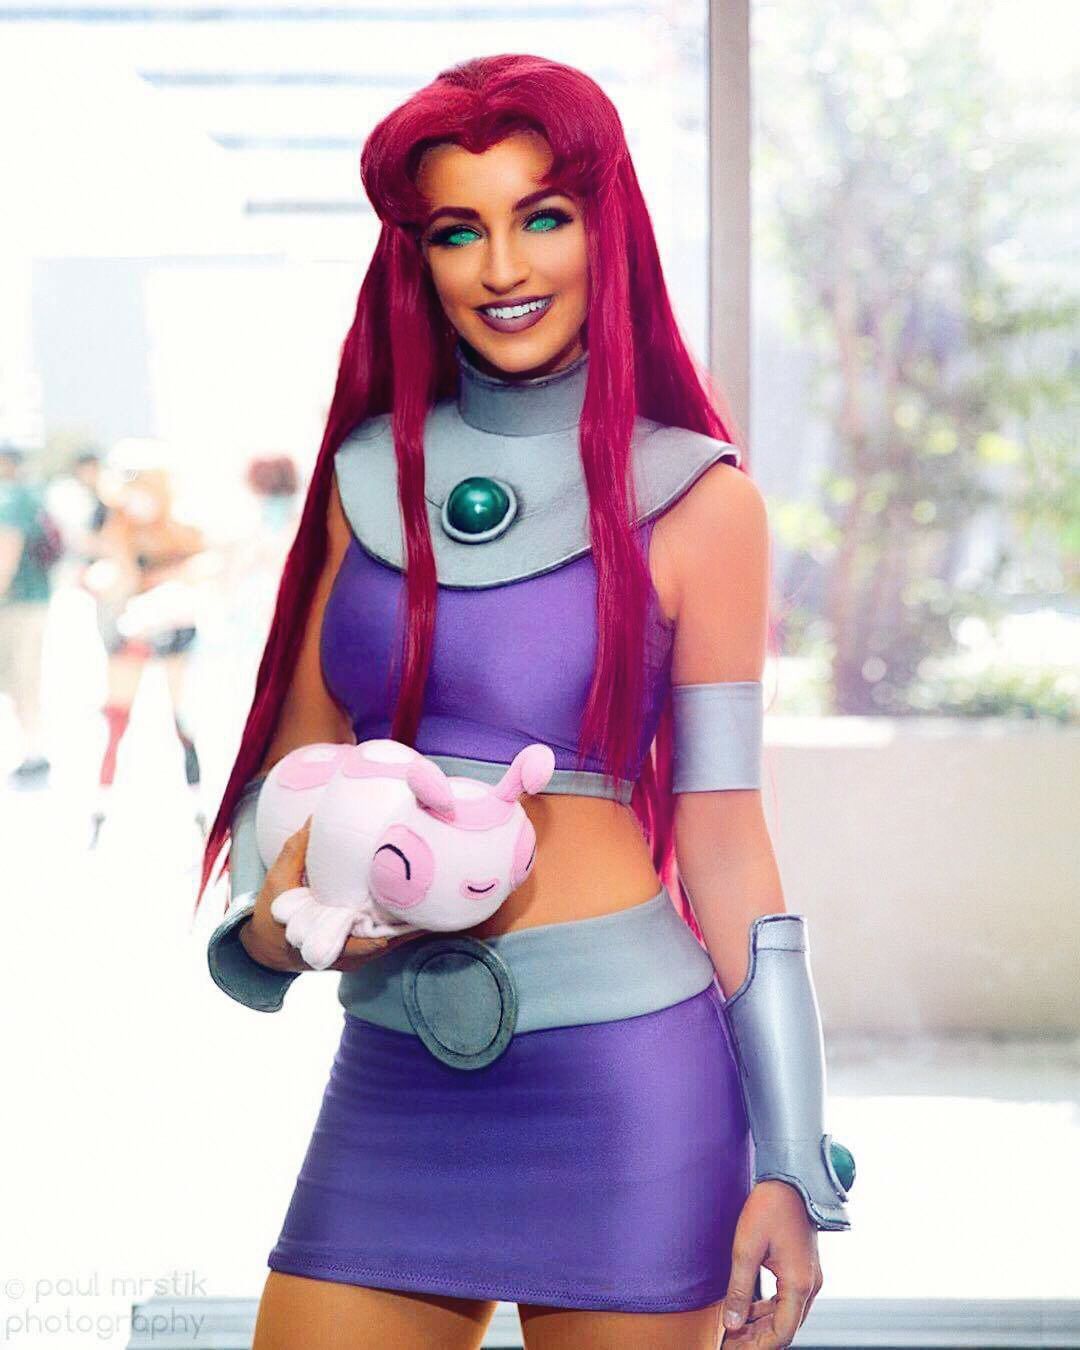 Starfire touching herself naked fakes